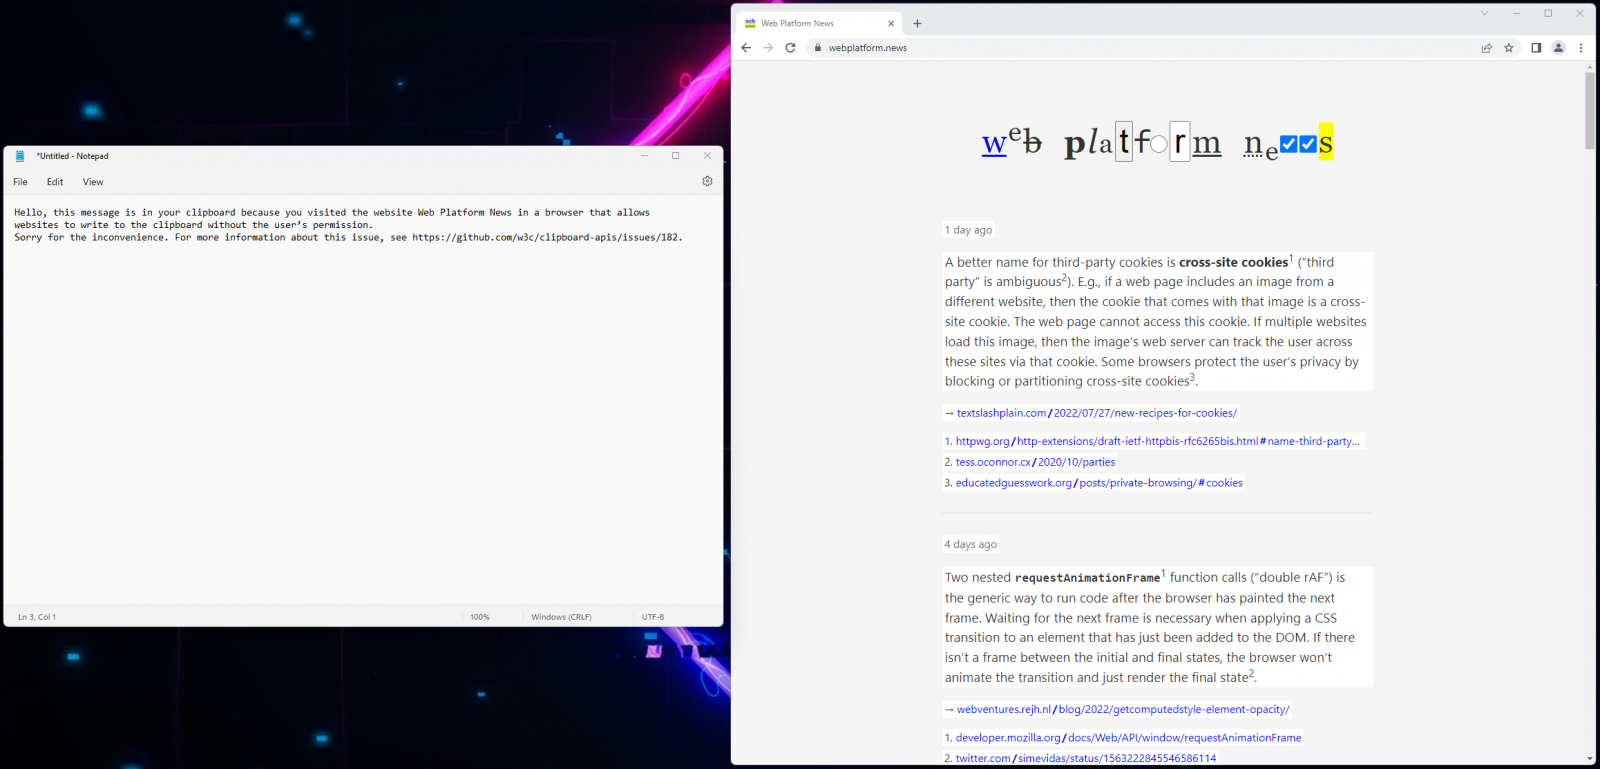 Clipboard overwritten by visiting a web page on Chrome